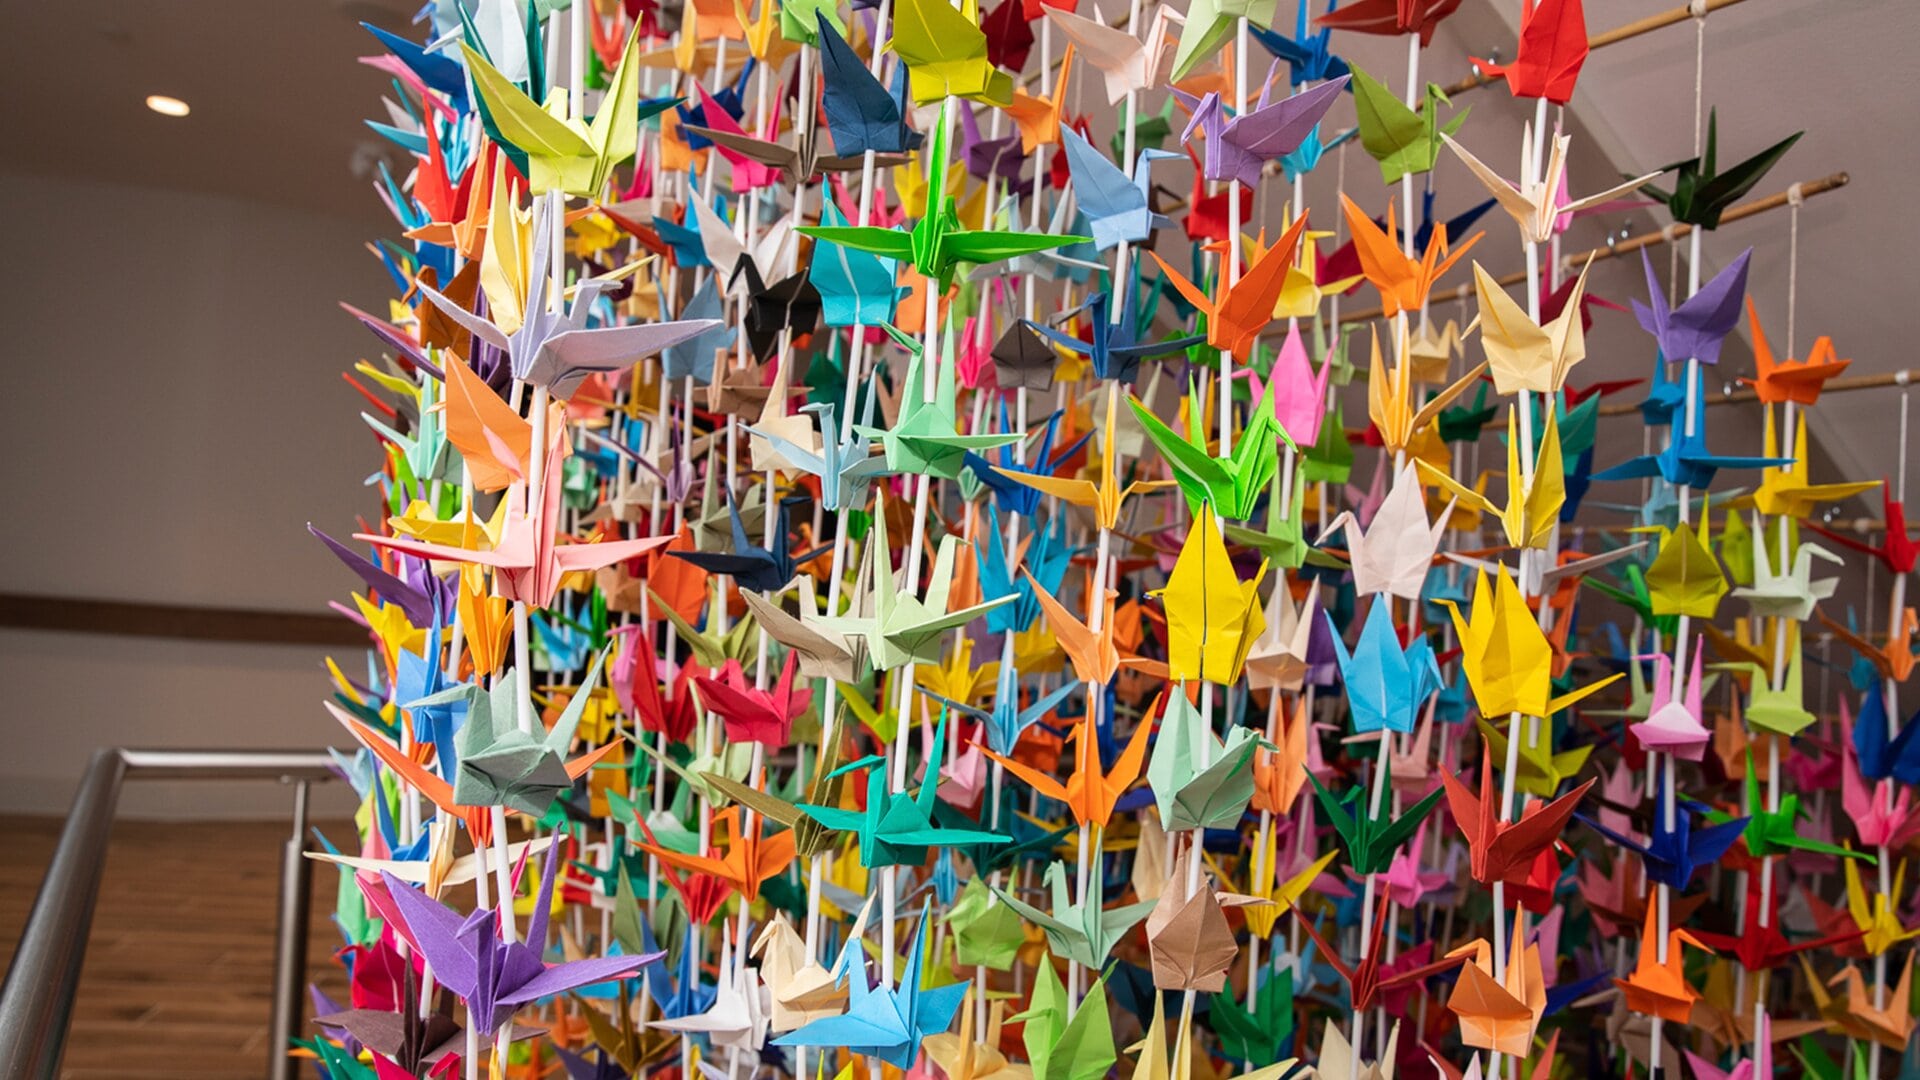 Hanging artwork made of origami birds in a rainbow of colours